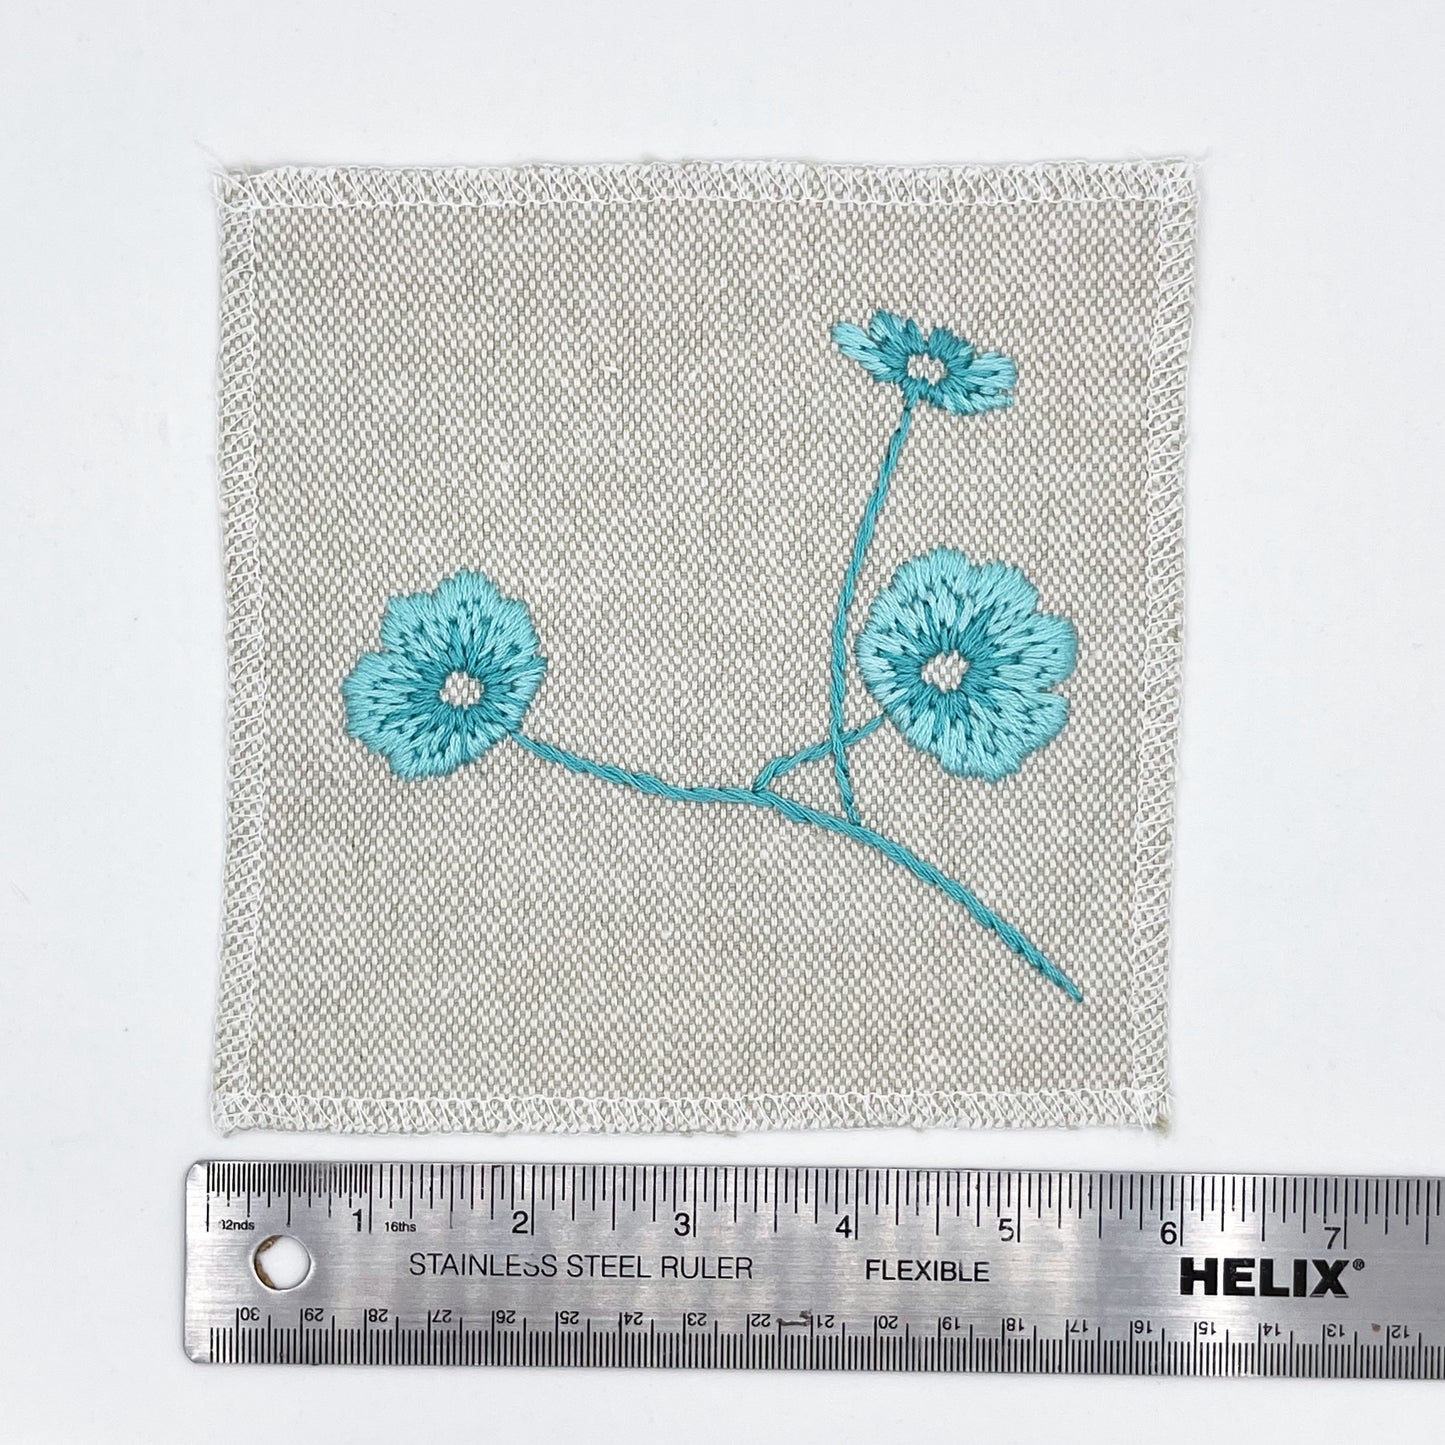 a natural colored square patch, hand embroidered with three poppies on a stem, in shades of robin's egg blue, placed next to a metal ruler to show a width of six inches, on a white background